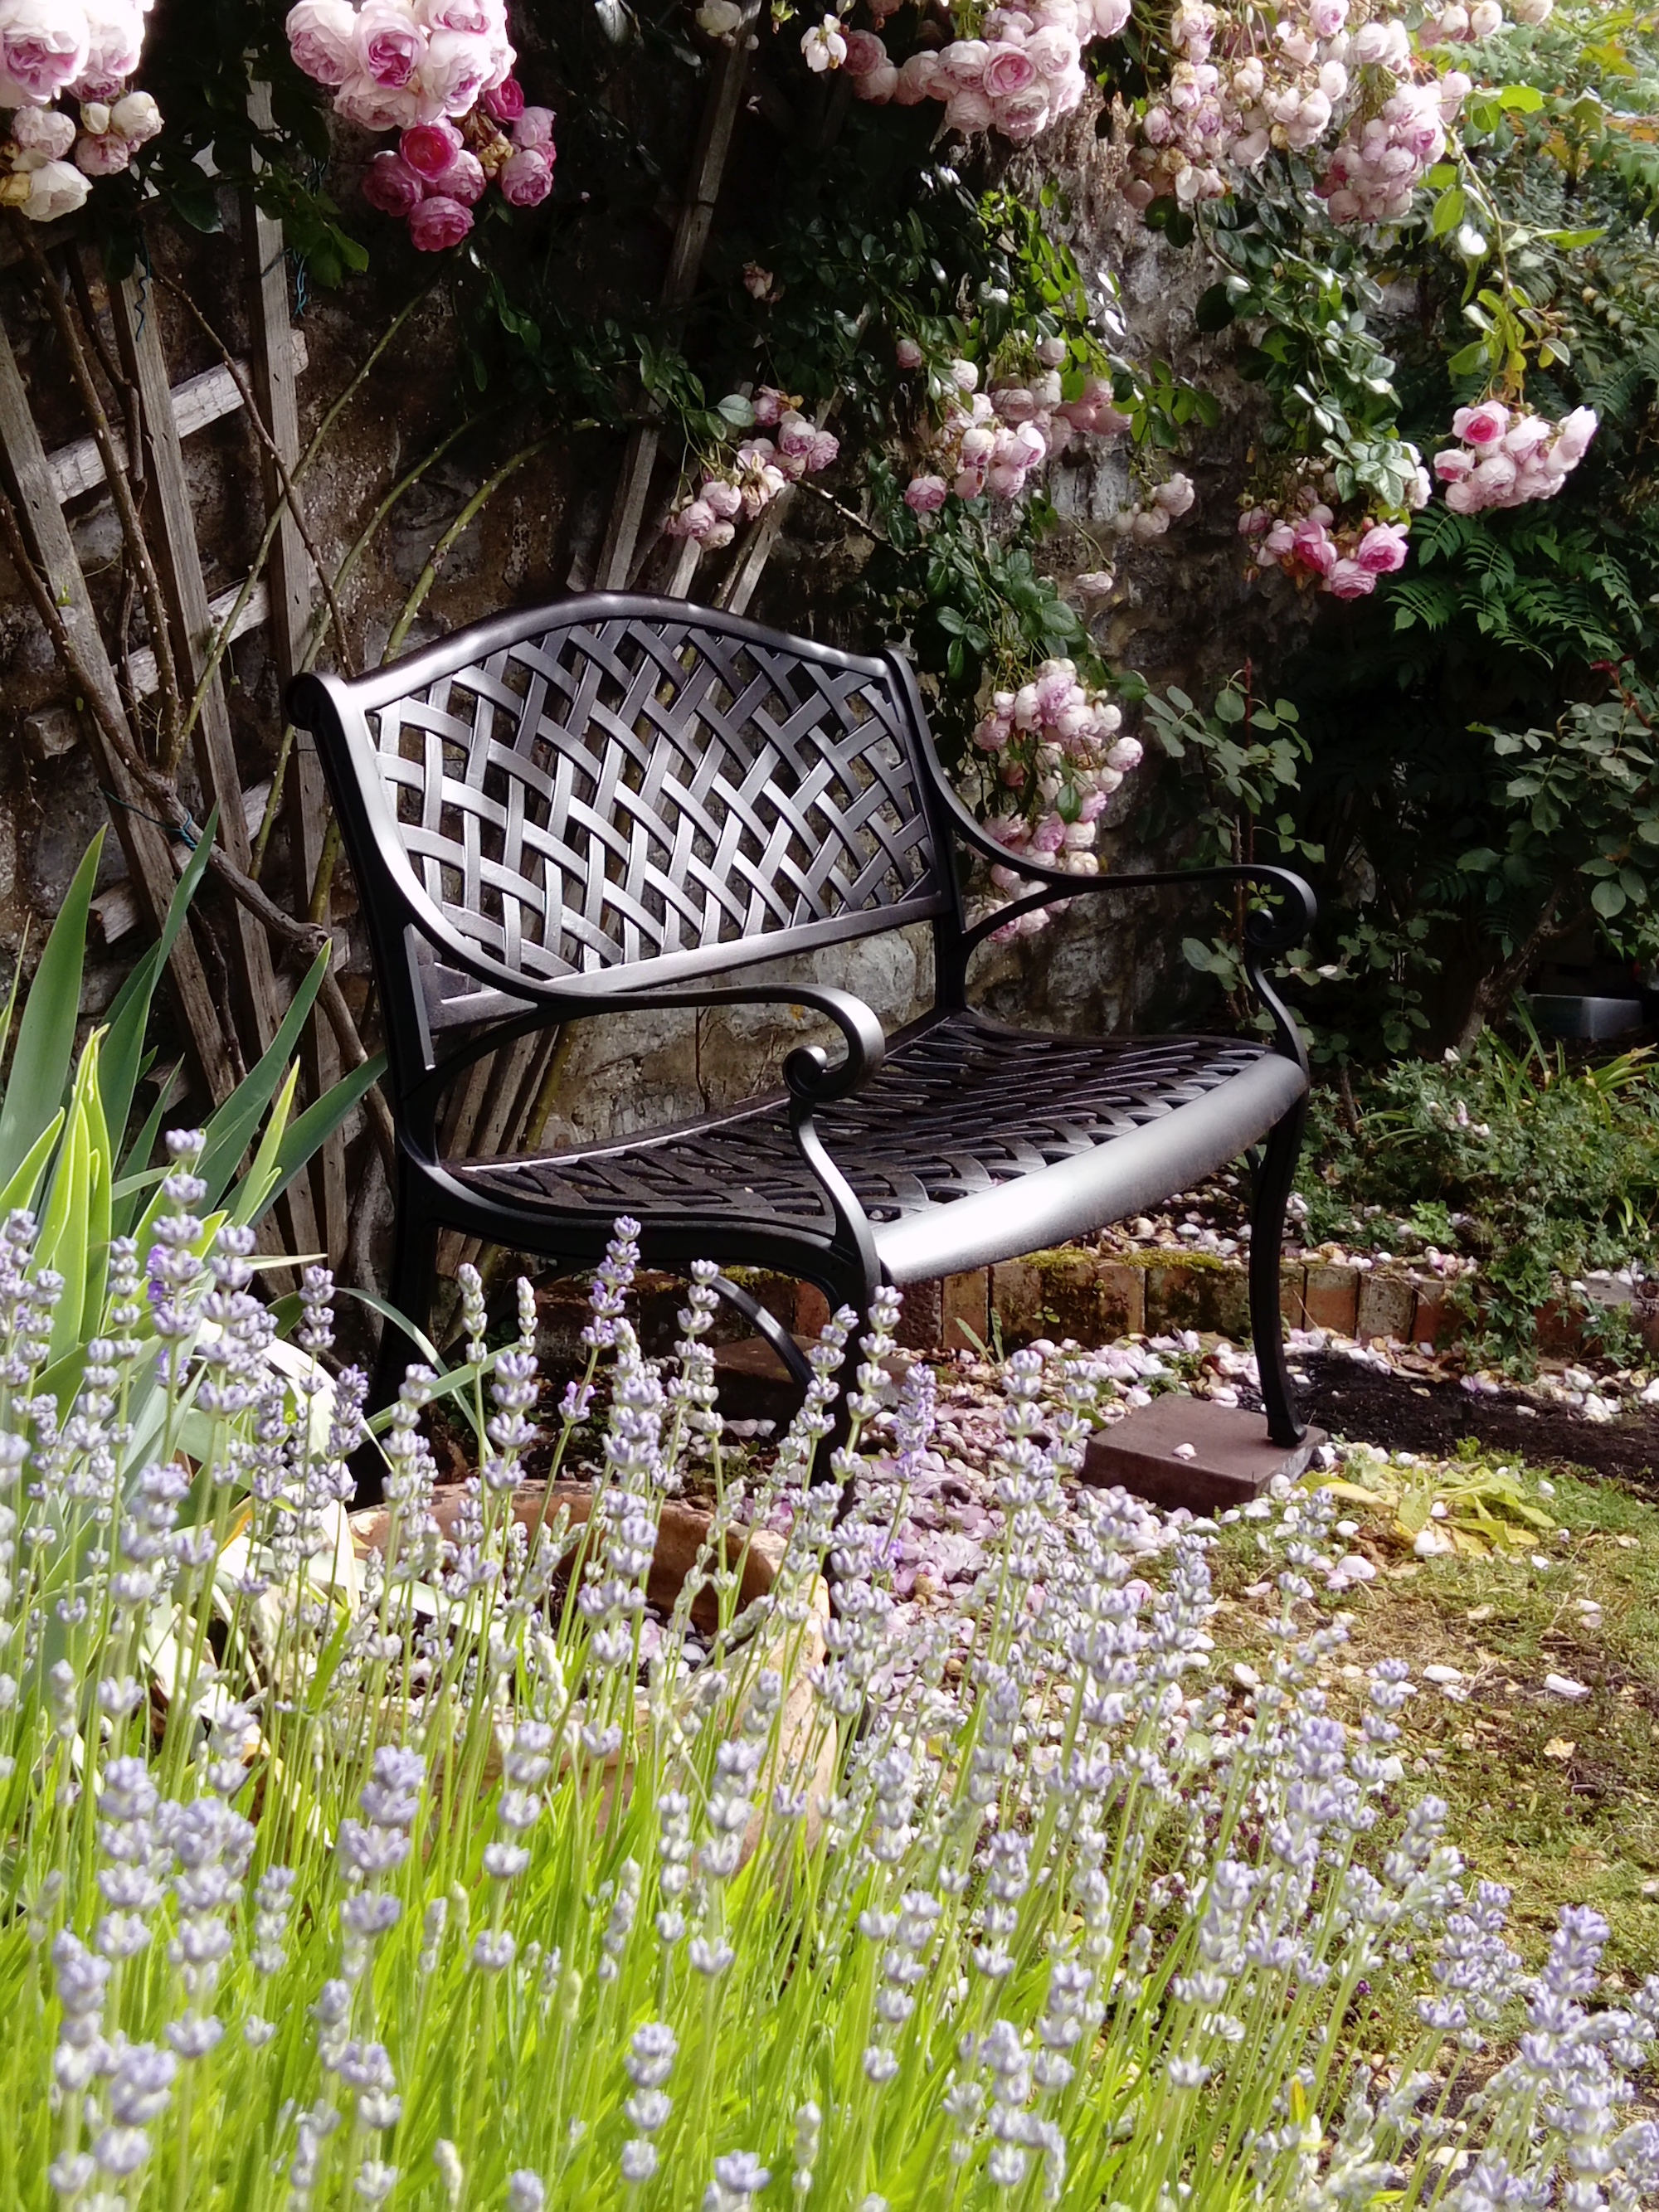 Why is a small garden bench perfect for a quiet corner?